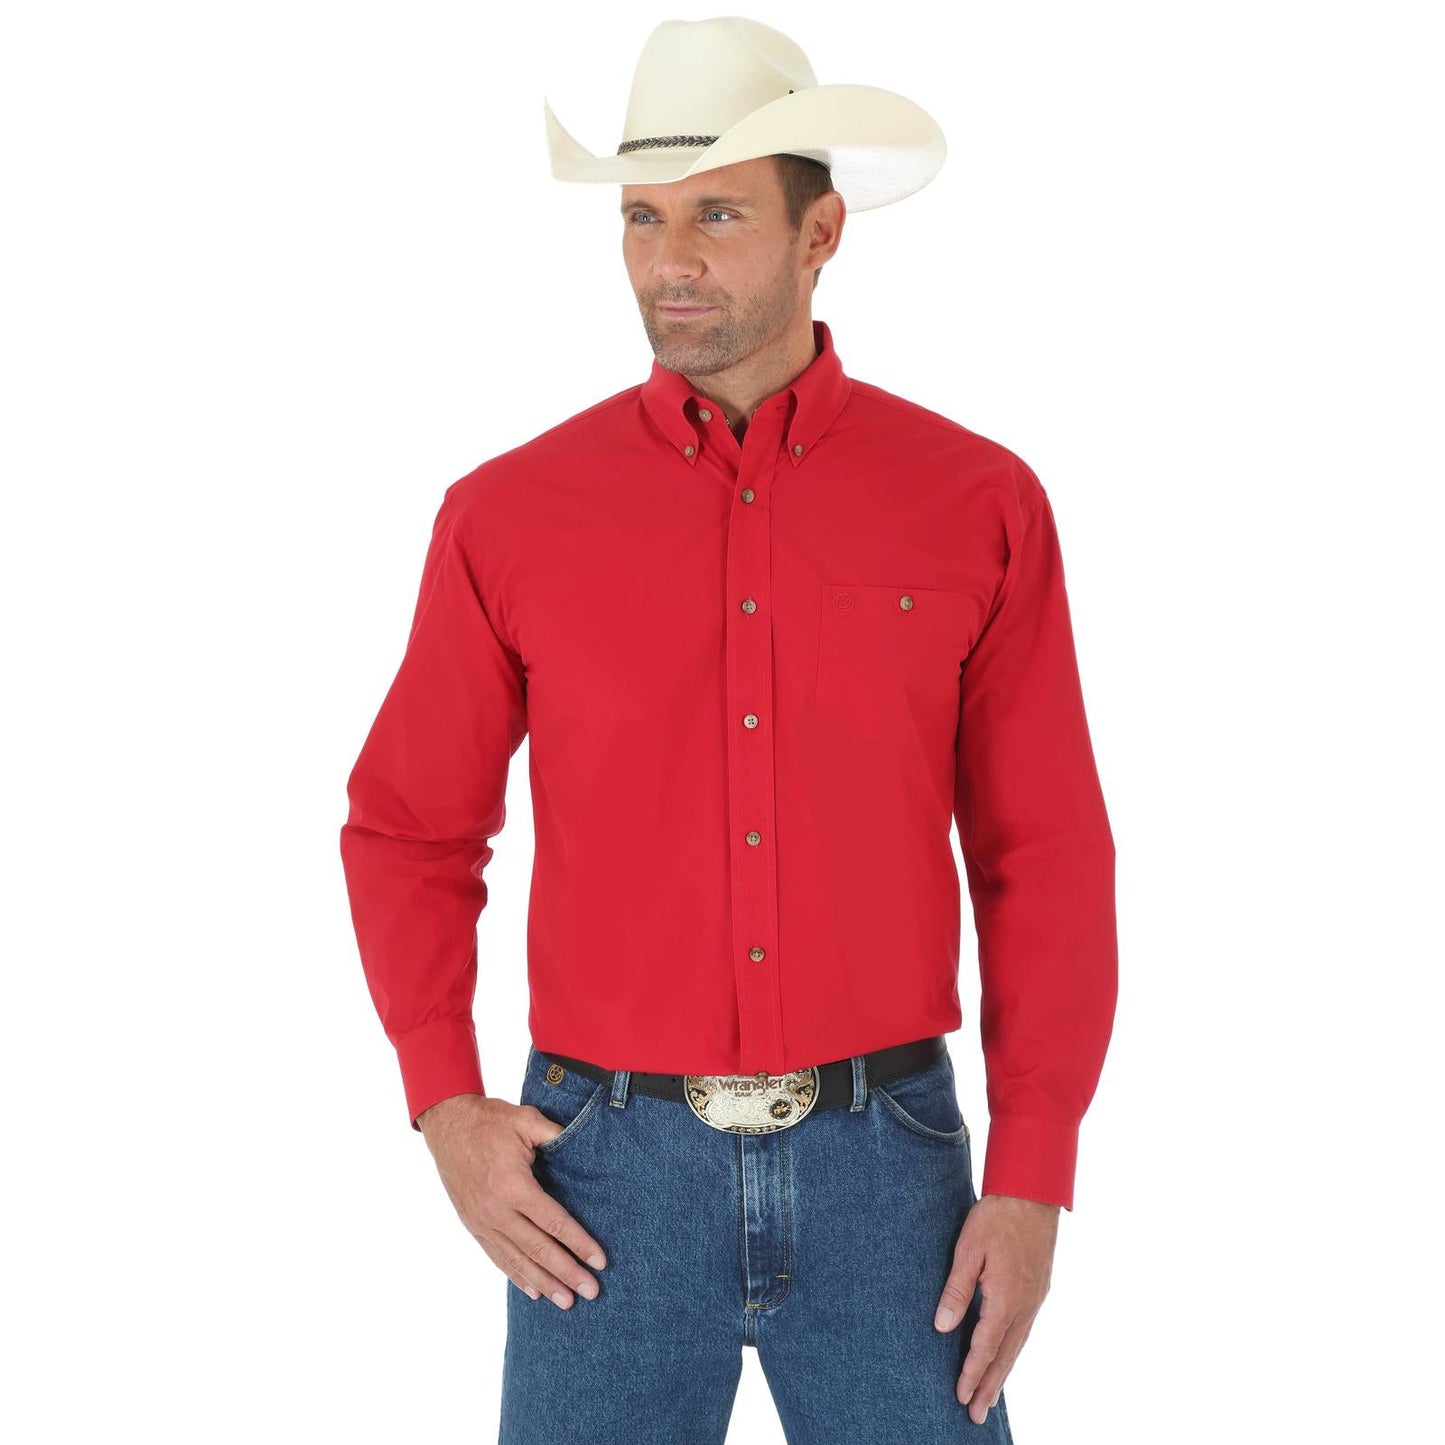 Top Men's (112345804) - Wrangler® George Straight Collection, Long Sleeve Shirt in Red